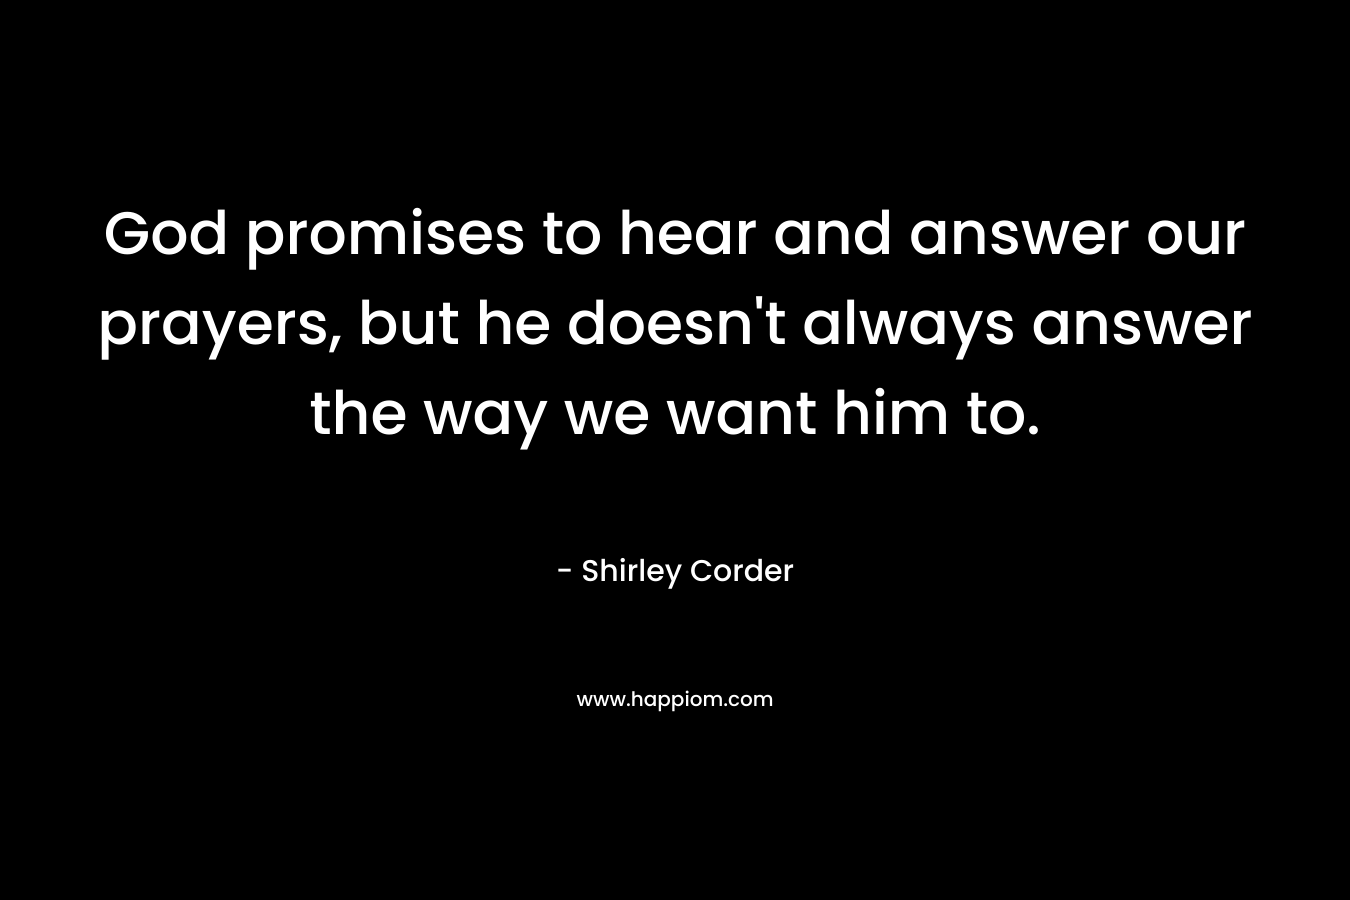 God promises to hear and answer our prayers, but he doesn't always answer the way we want him to.